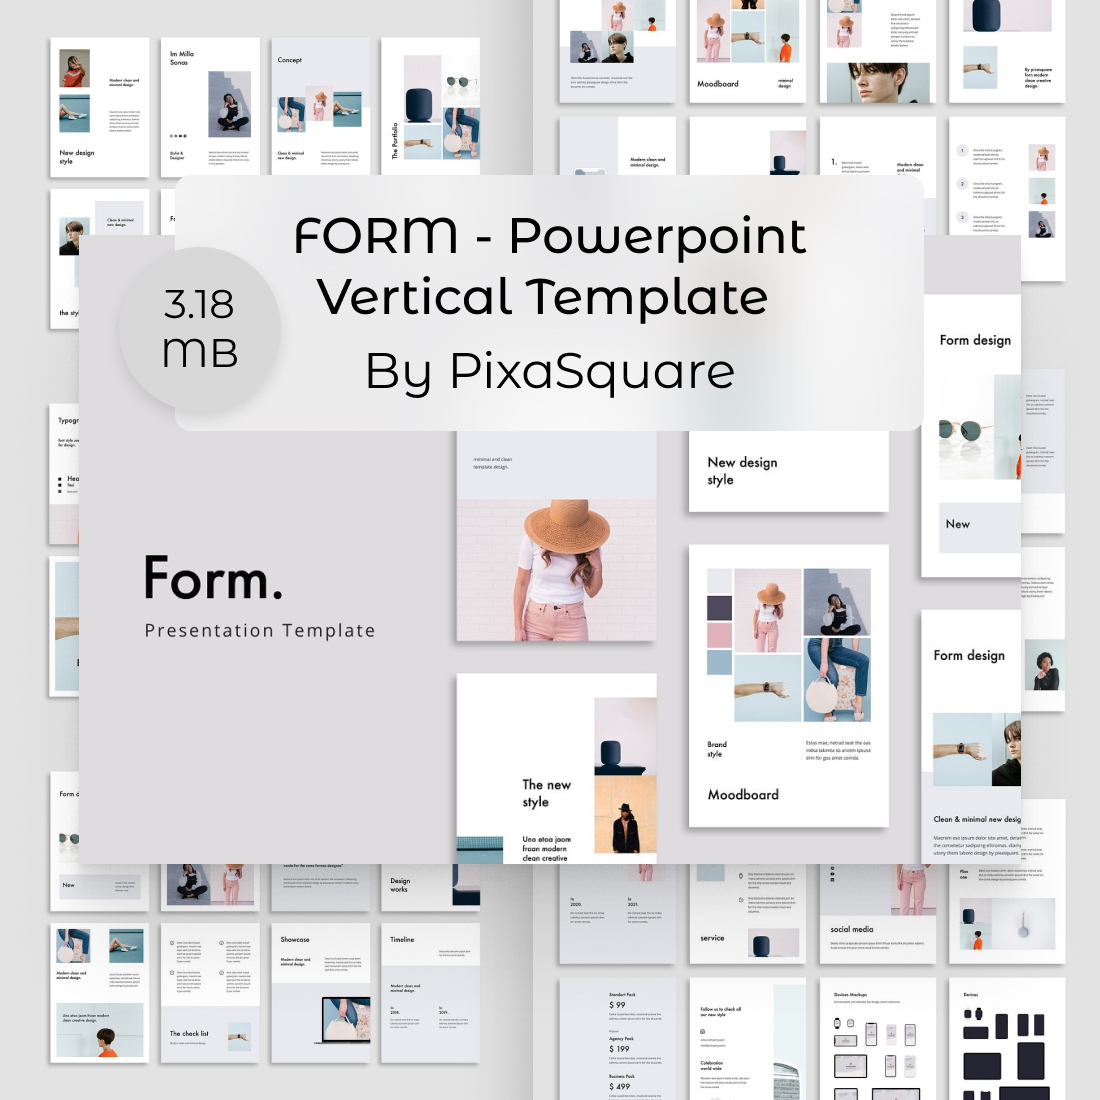 FORM - Powerpoint Vertical Template by MasterBundles.